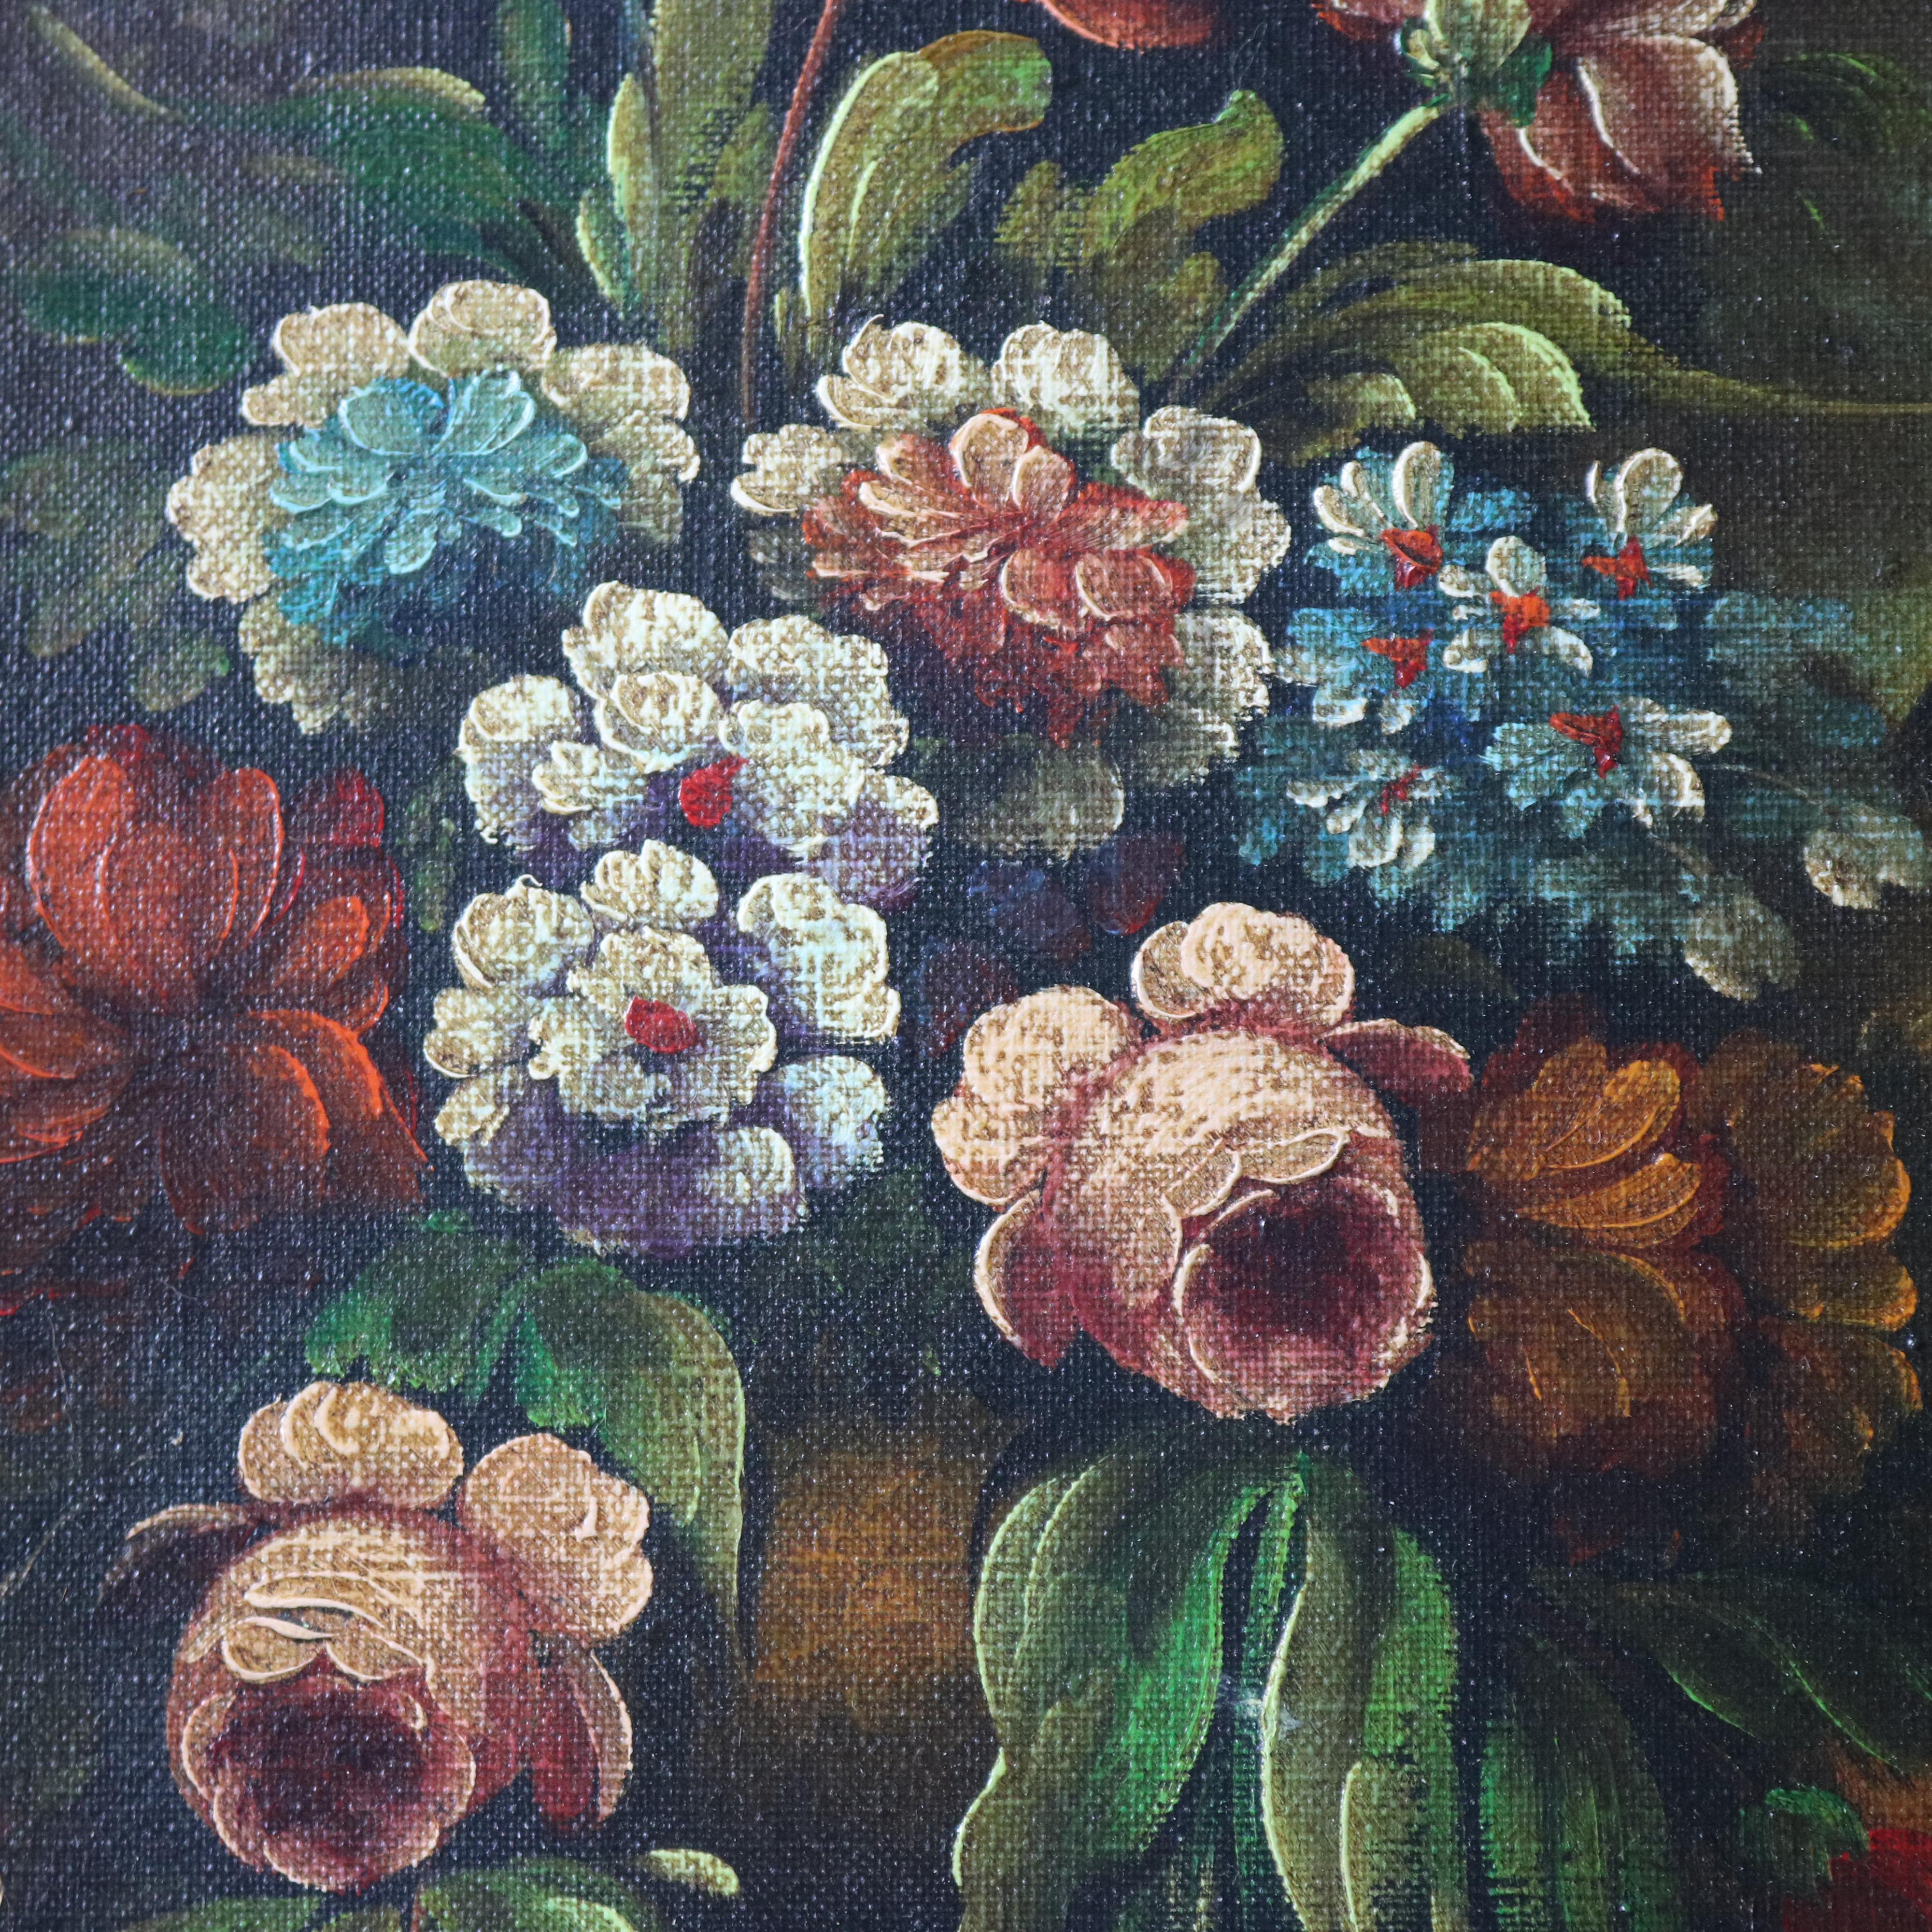 An antique Continental floral still life depicts garden flowers in tabletop vase, artist signed lower right Perry, seated in giltwood frame, c1890

Measures - overall 22